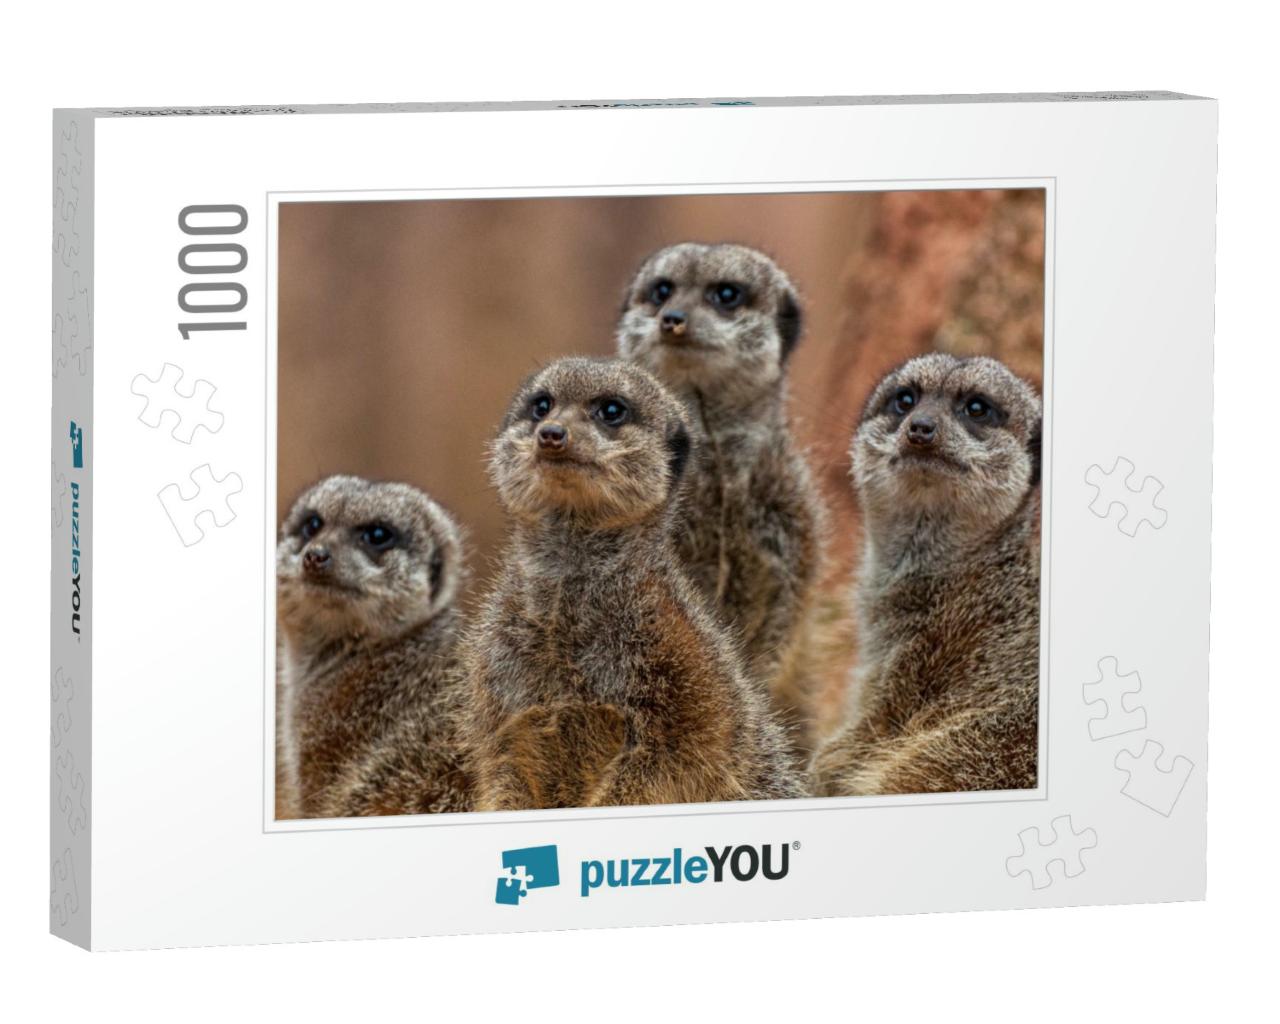 A Group of Cute Meerkats... Jigsaw Puzzle with 1000 pieces